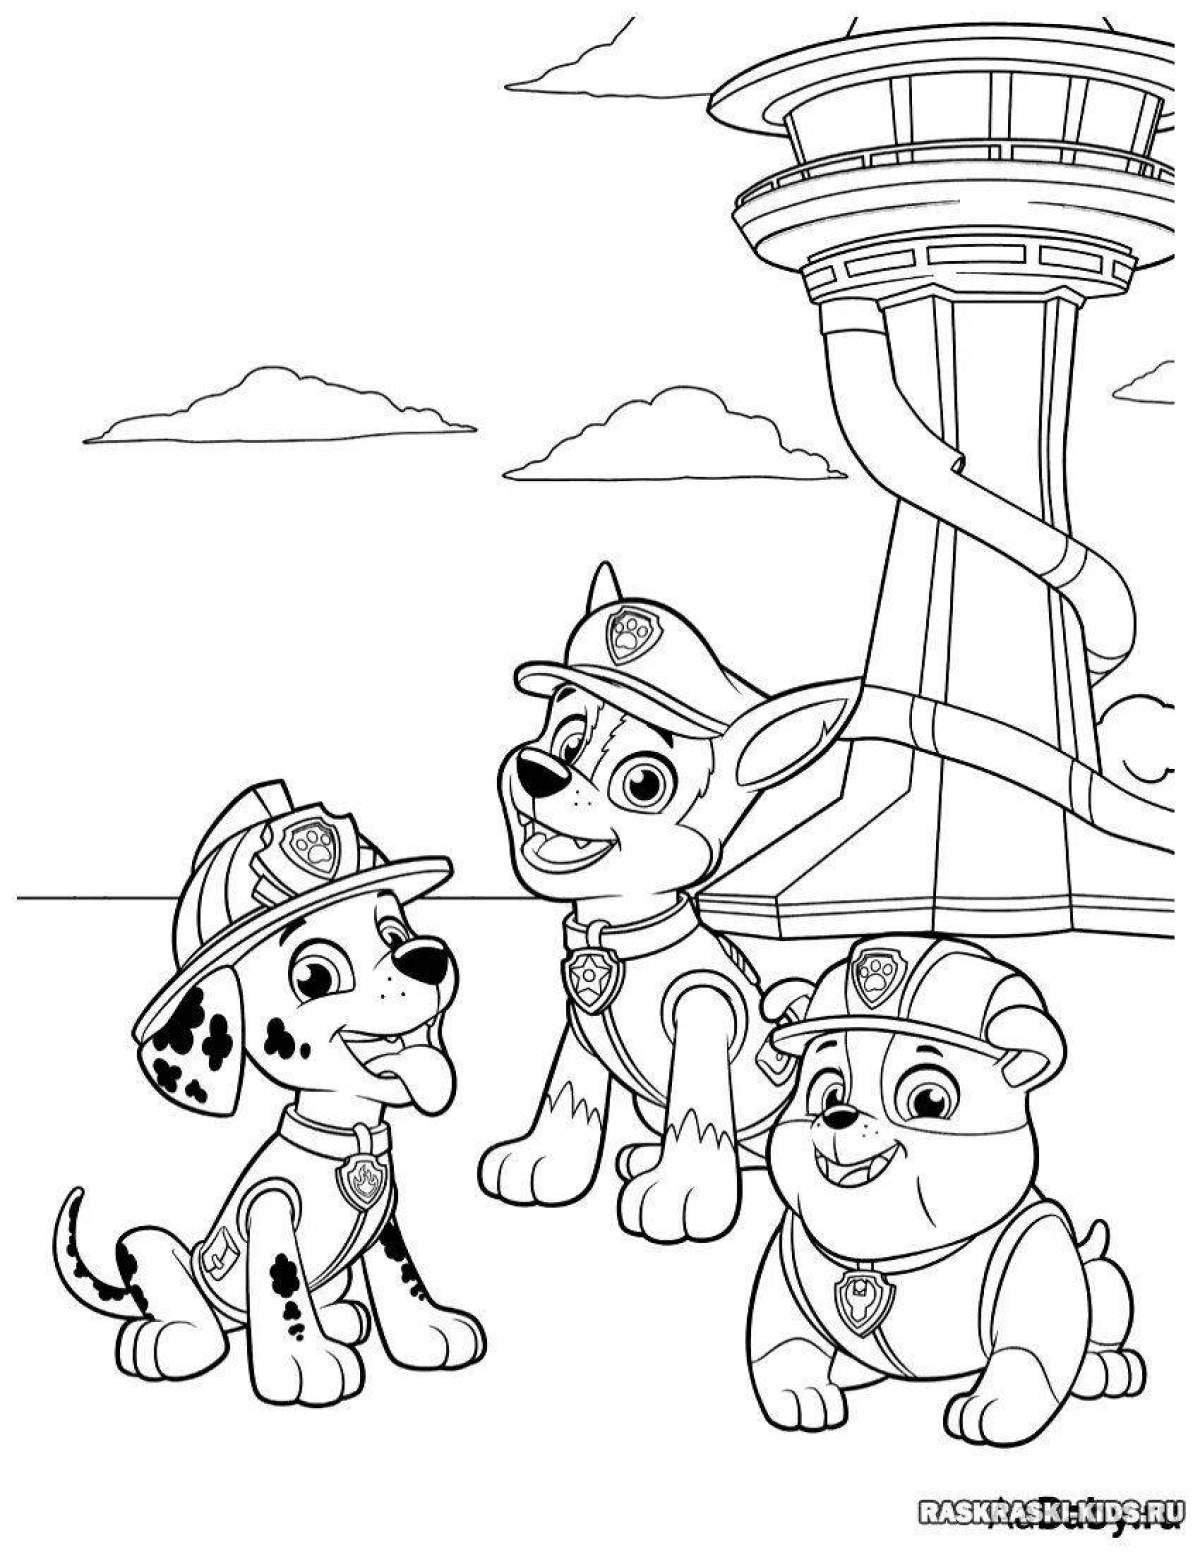 Fun coloring page paw patrol for kids